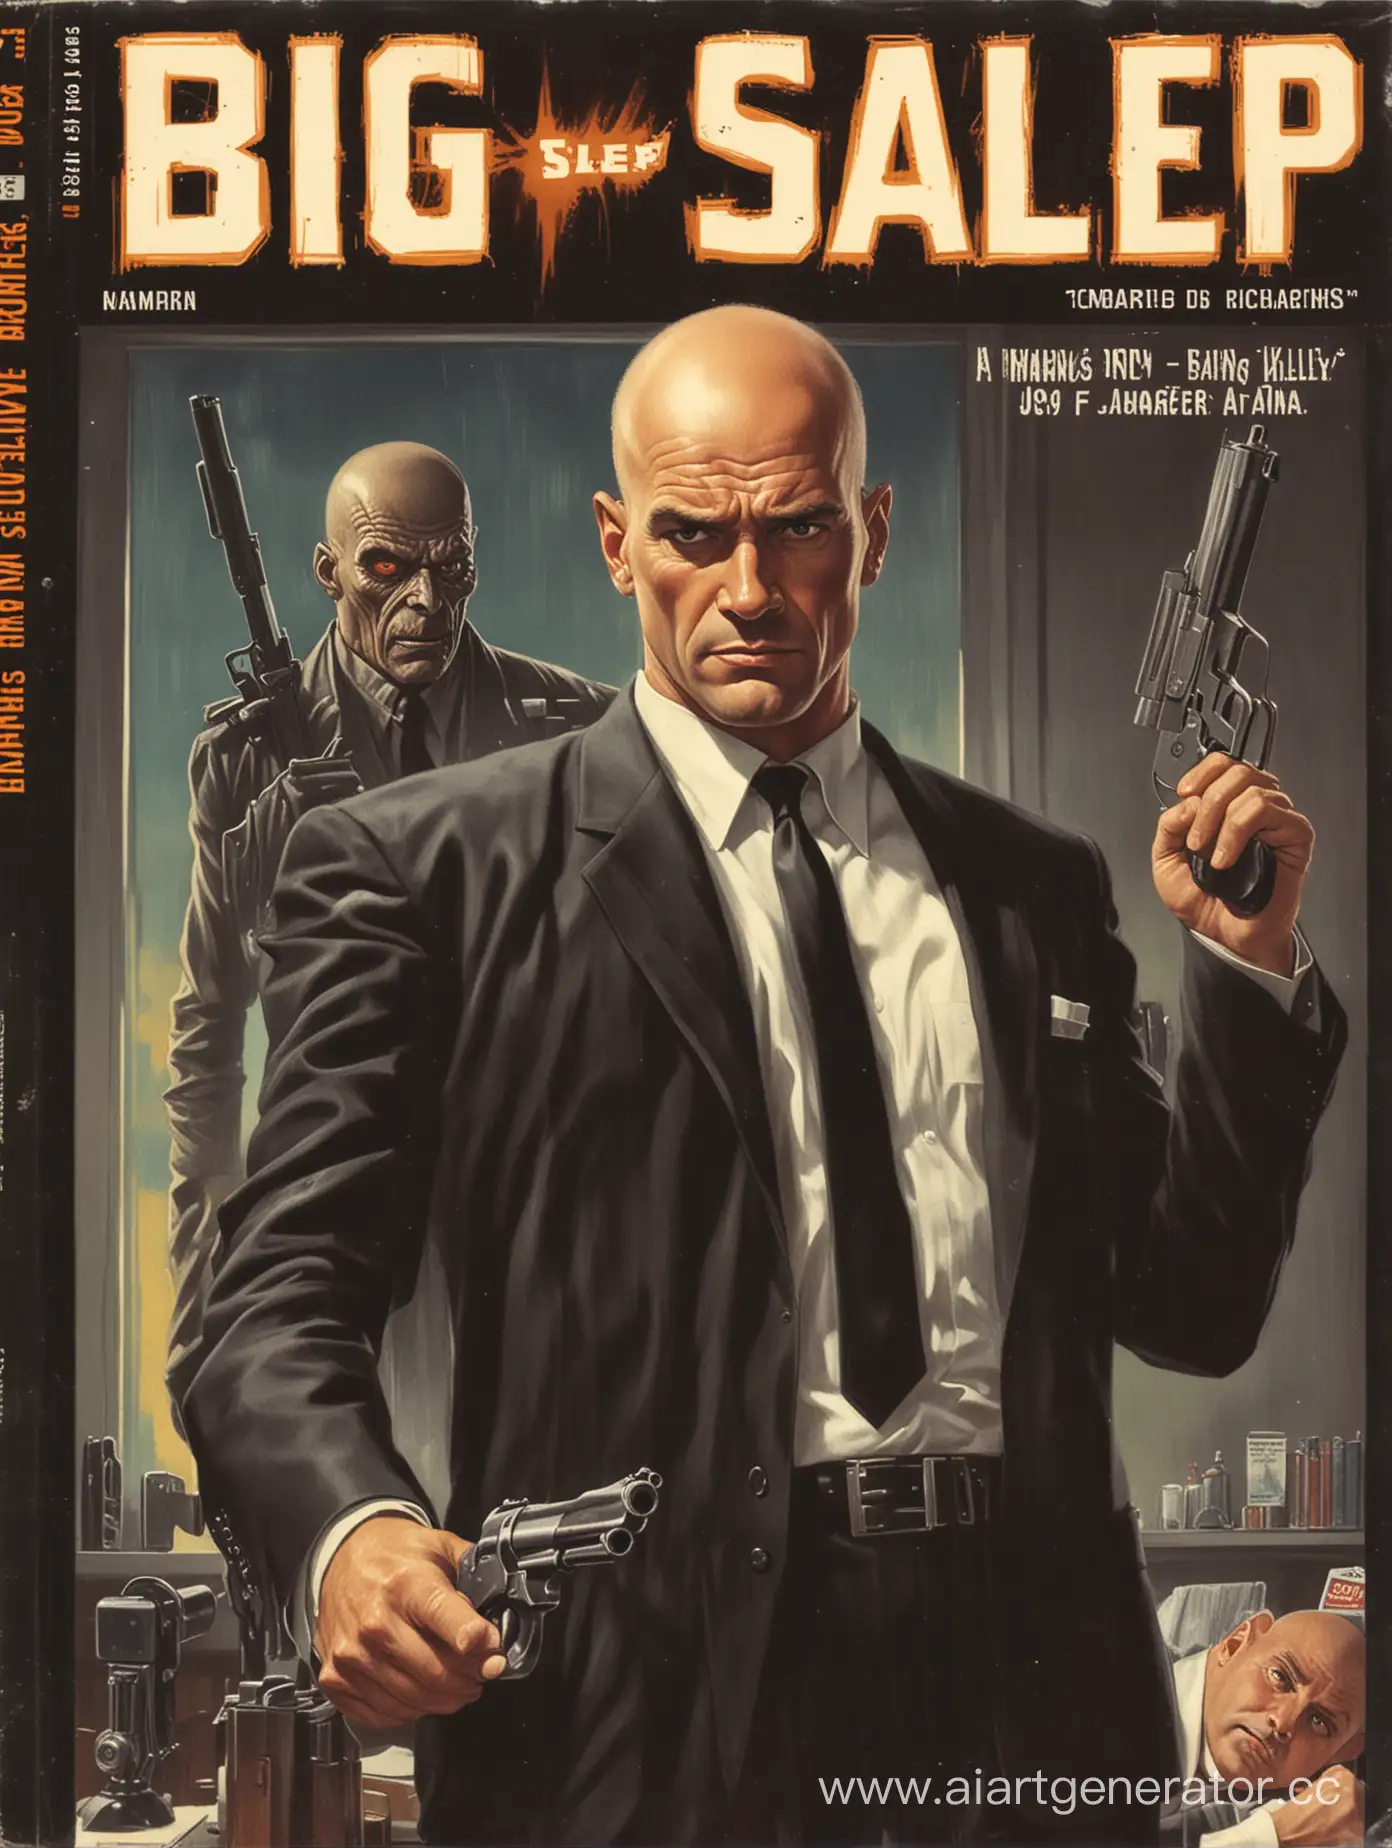 Bald-Man-with-Gun-in-1950s-Lurid-Pulp-Fiction-Book-Cover-Big-Sales-Robot